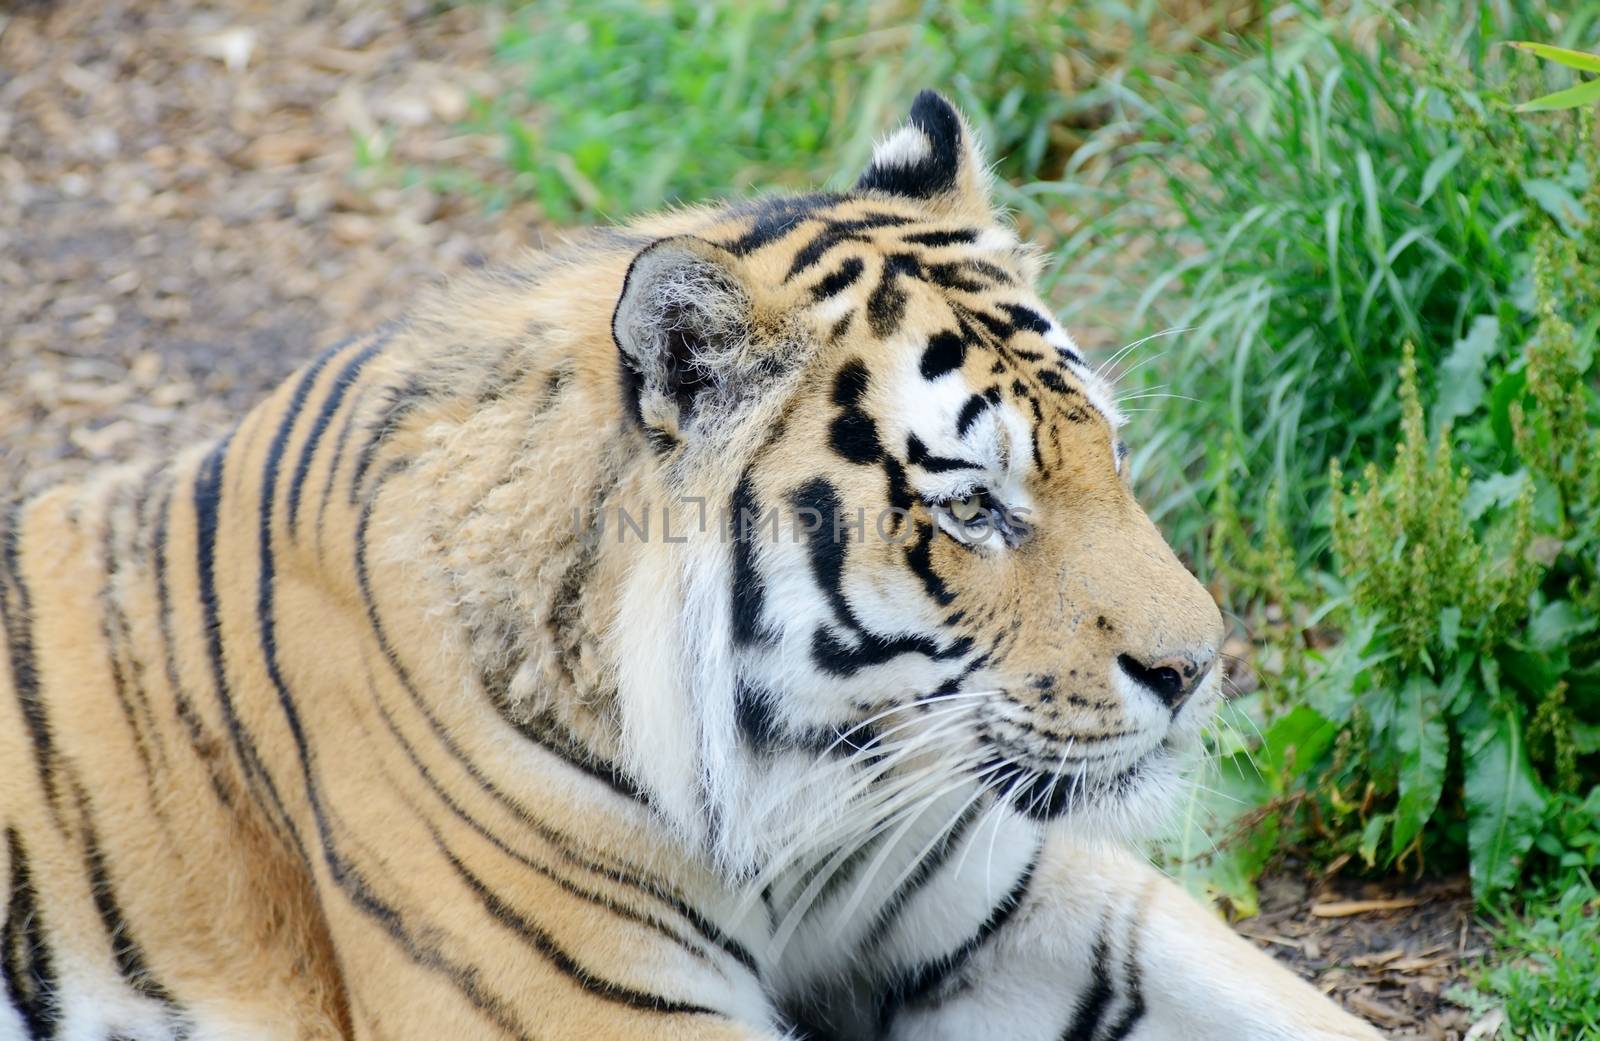 Tiger looking by kmwphotography